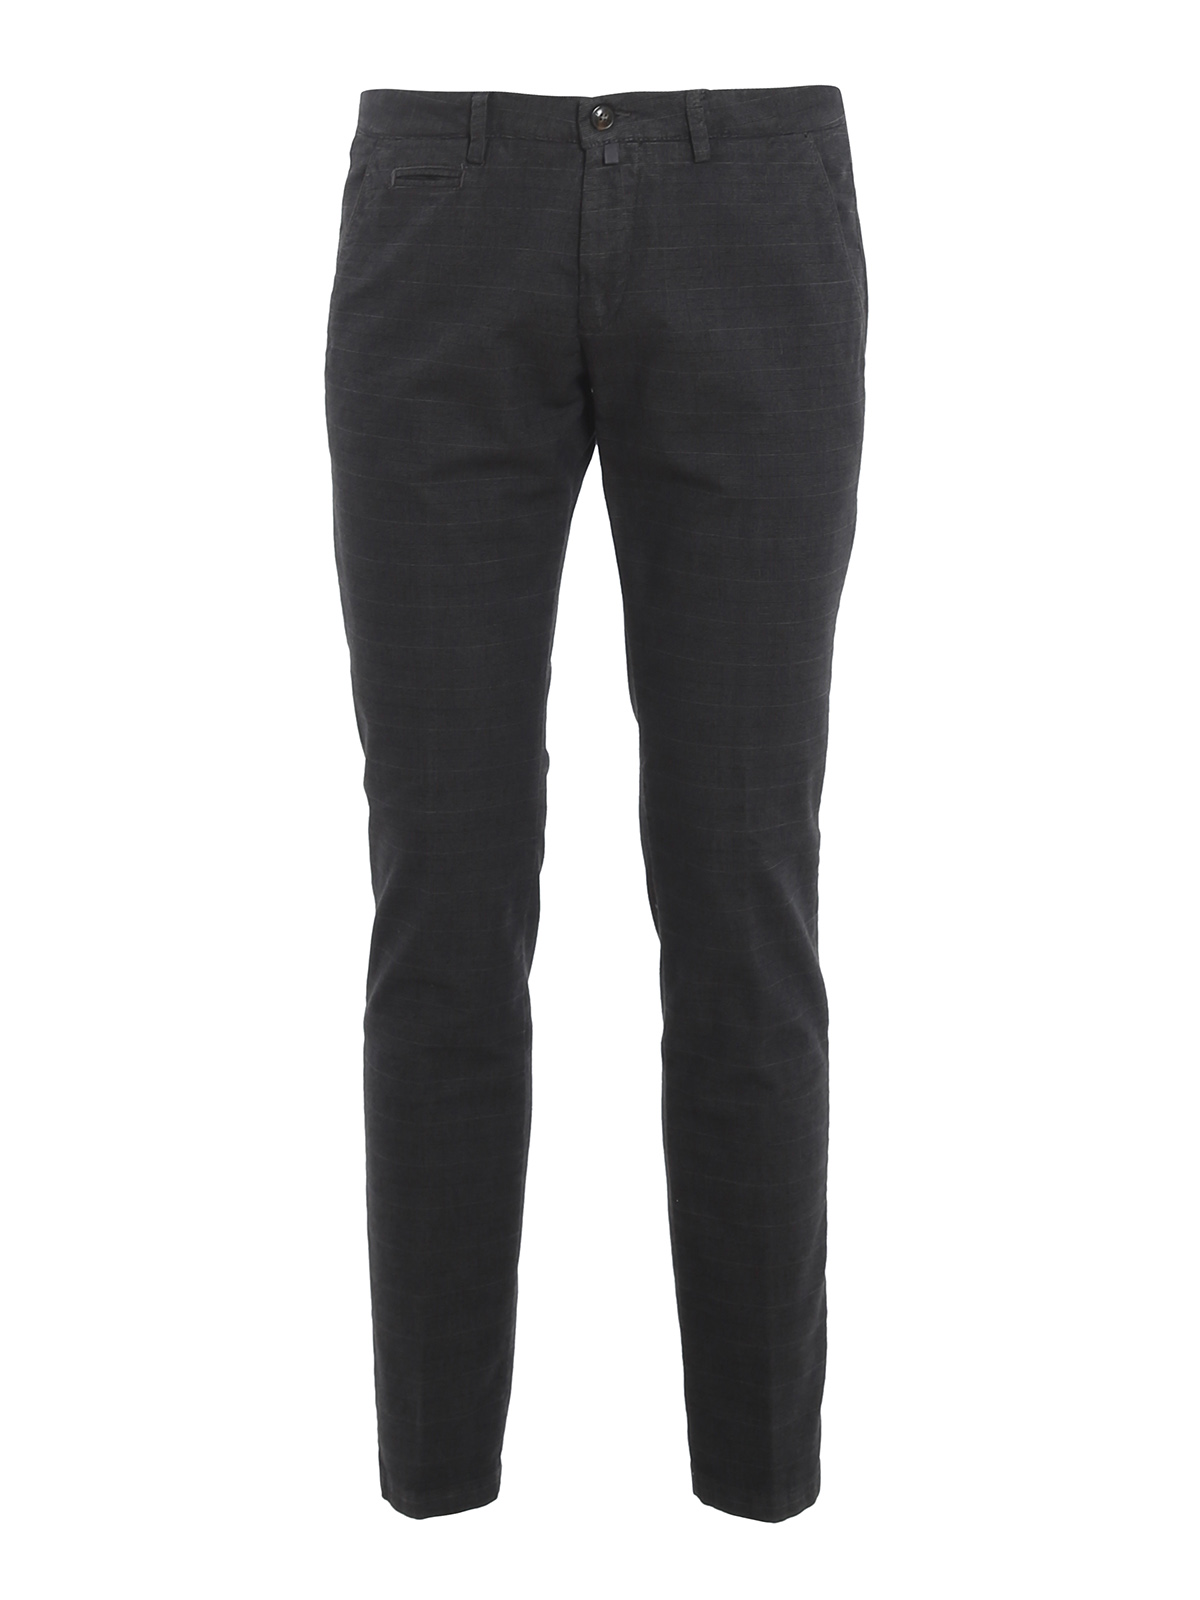 Briglia 1949 - Mini Prince of Wales patterned pants - casual trousers ...